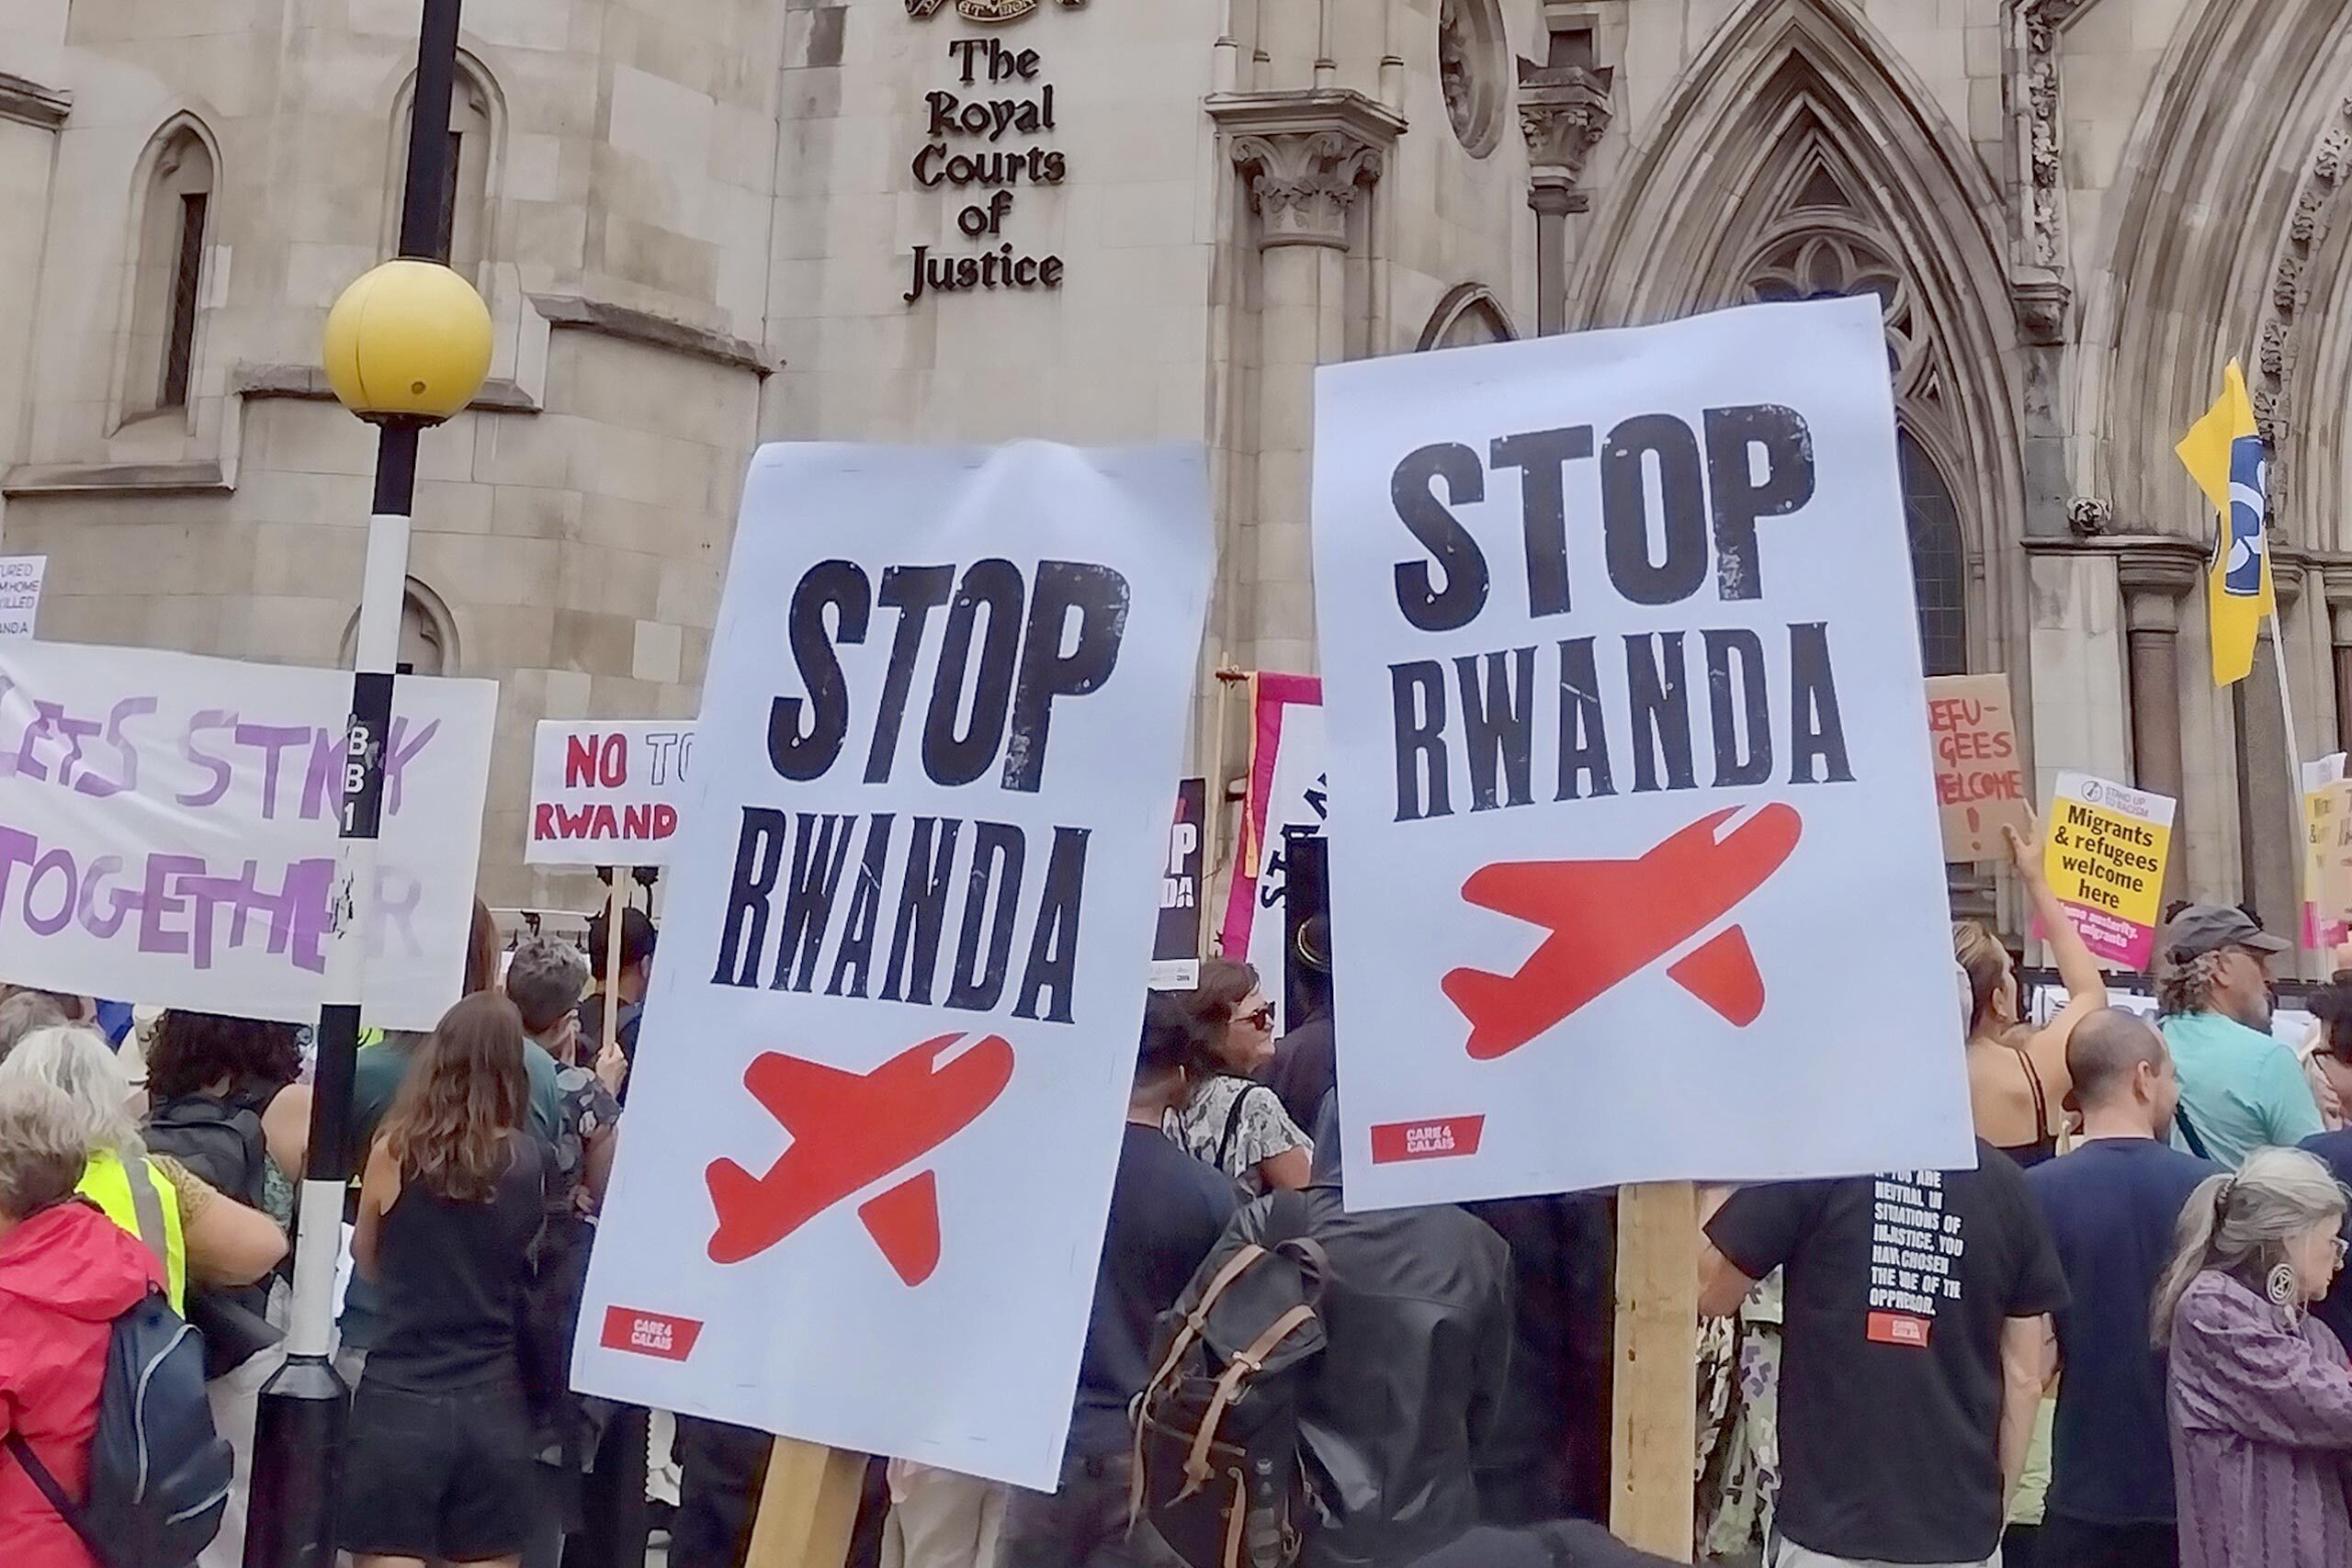 Demonstrators hold placards against the Rwanda plan, at a protest outside the Royal Courts of Justice in London.